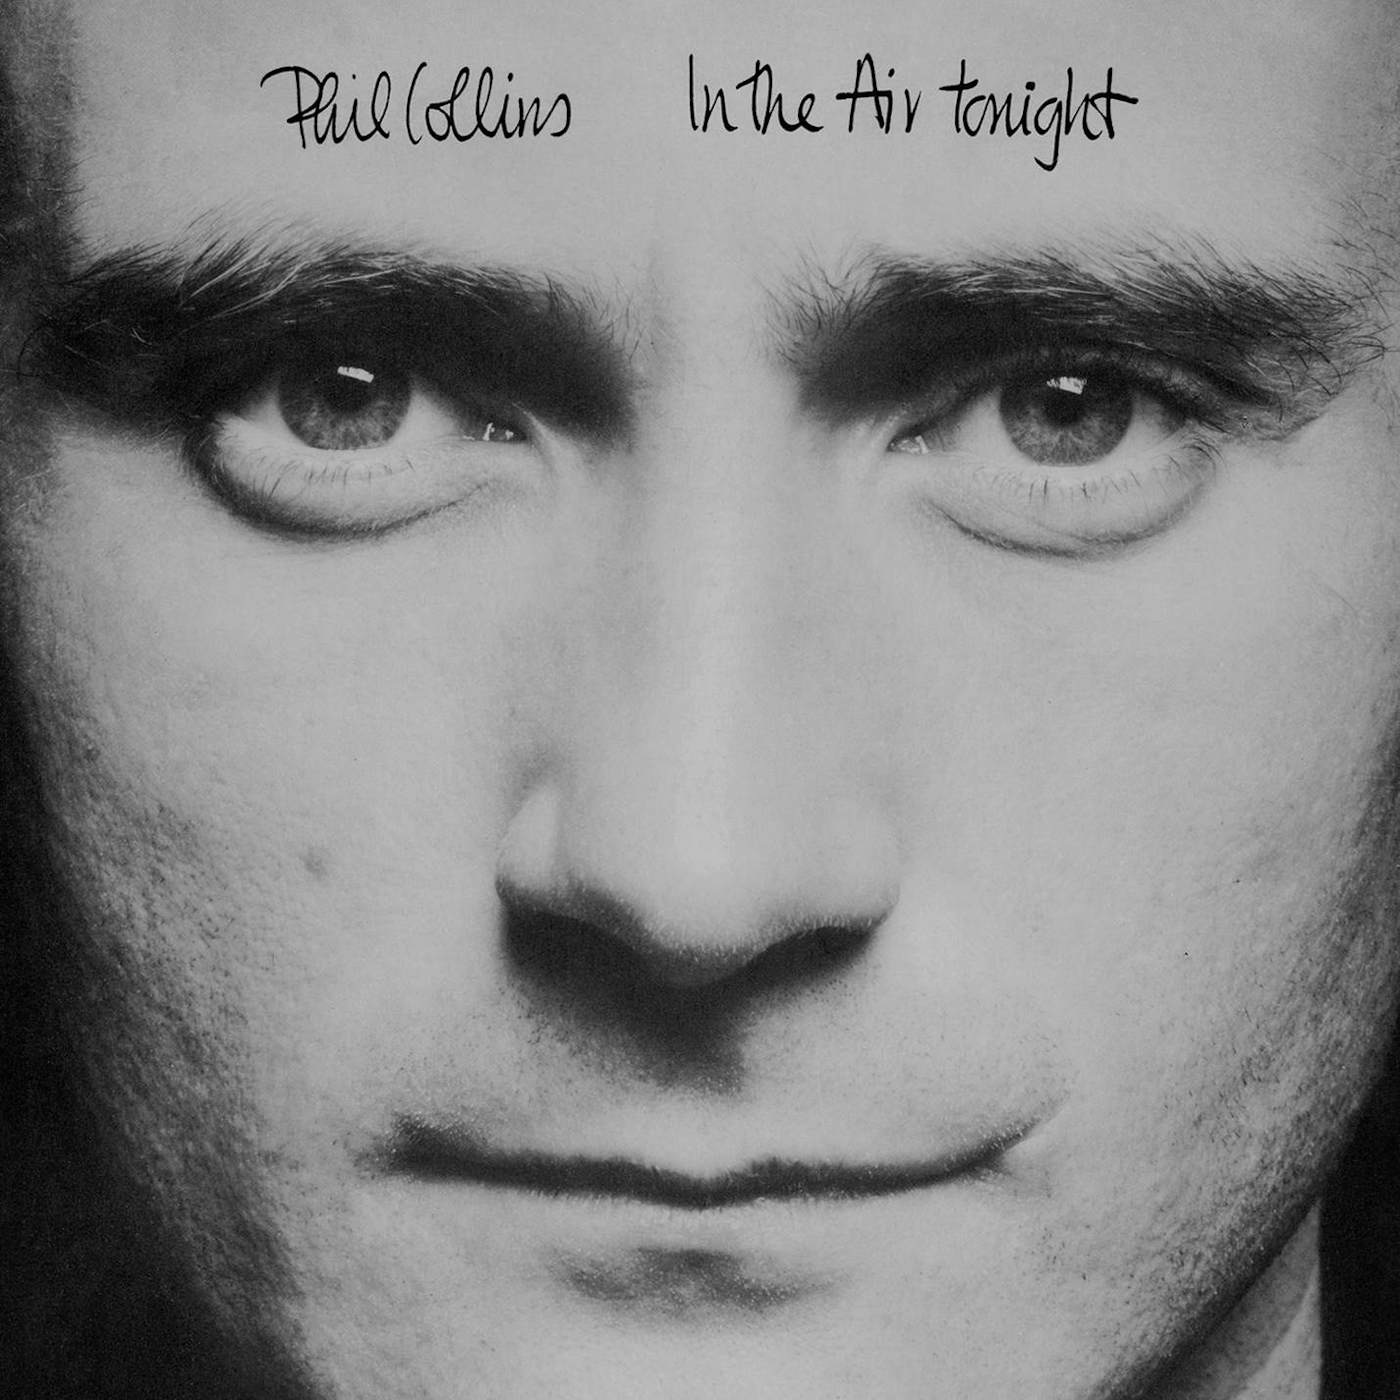 Phil Collins In The Air Tonight 7" Vinyl Record